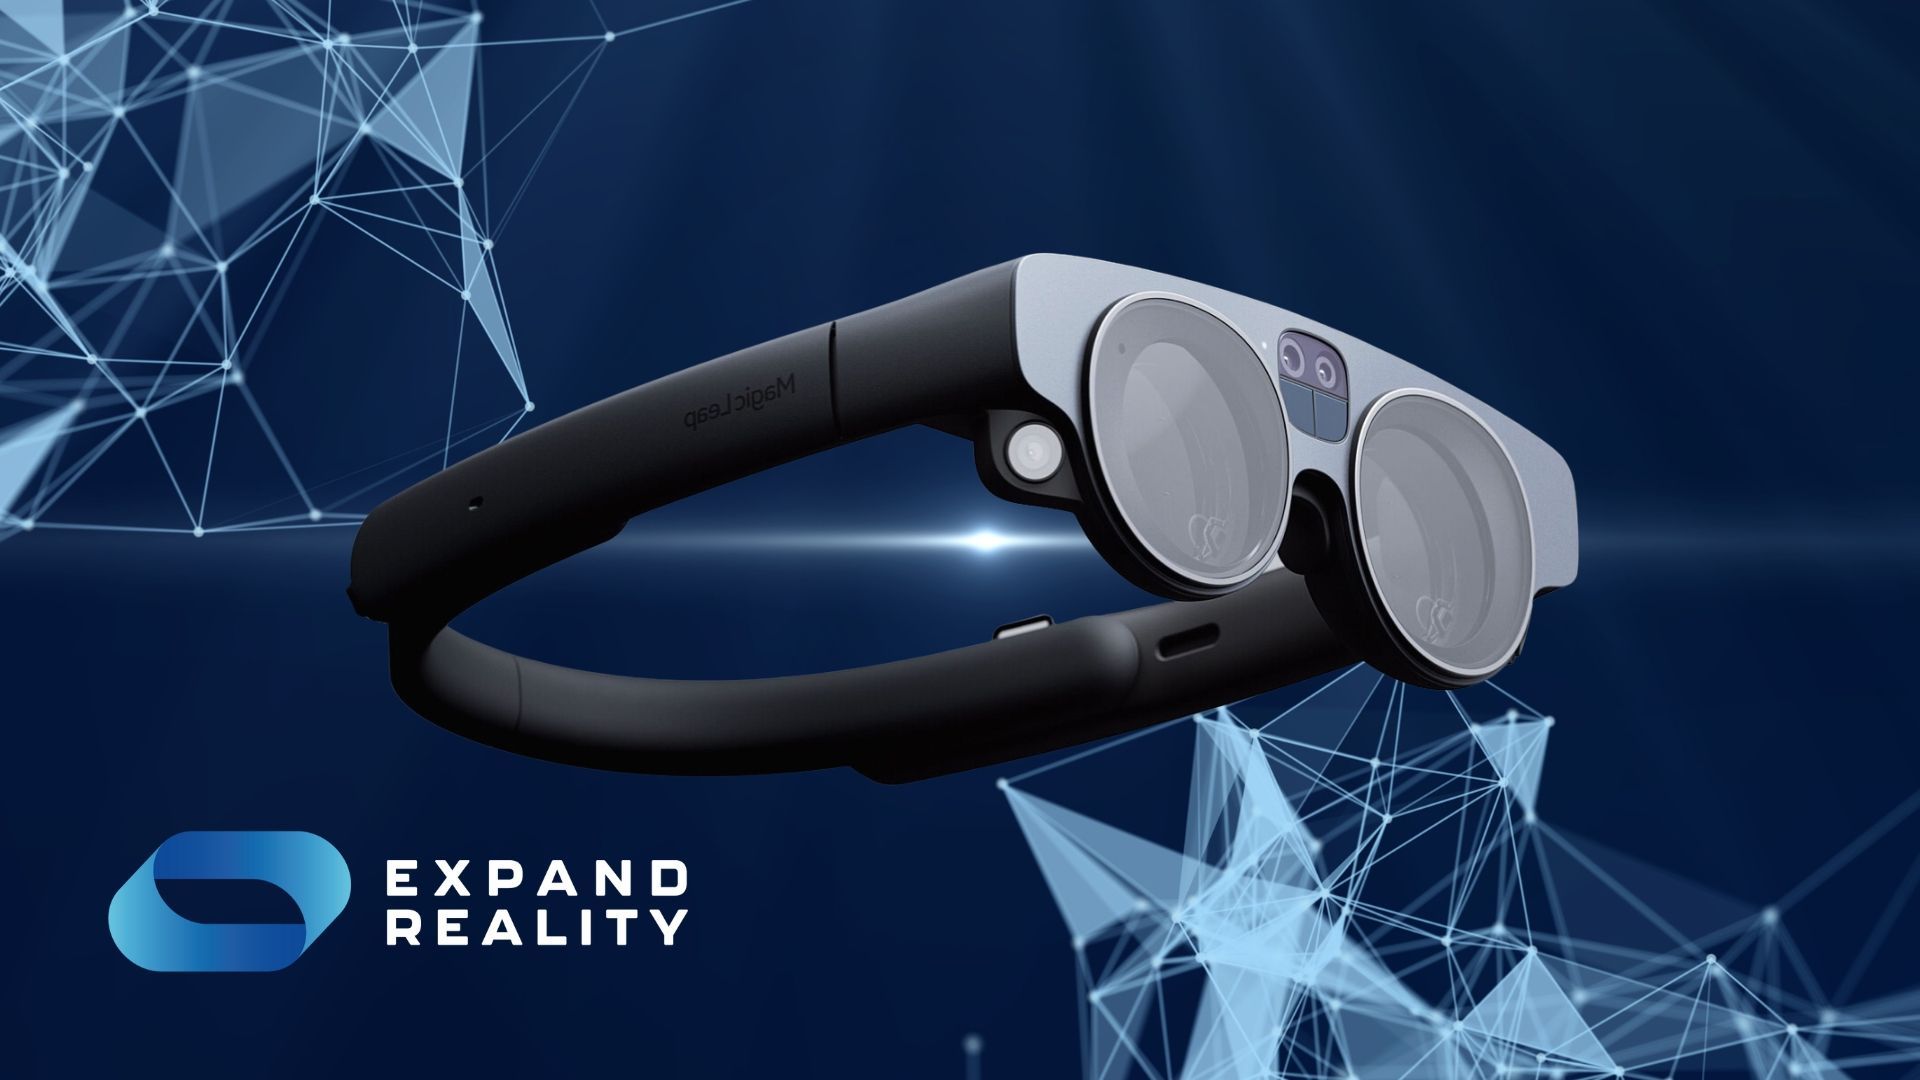 Magic Leap 2 is an AR headset with industry-leading optics that can be used in a range of sectors. Learn more about its ecosystem of apps and services.